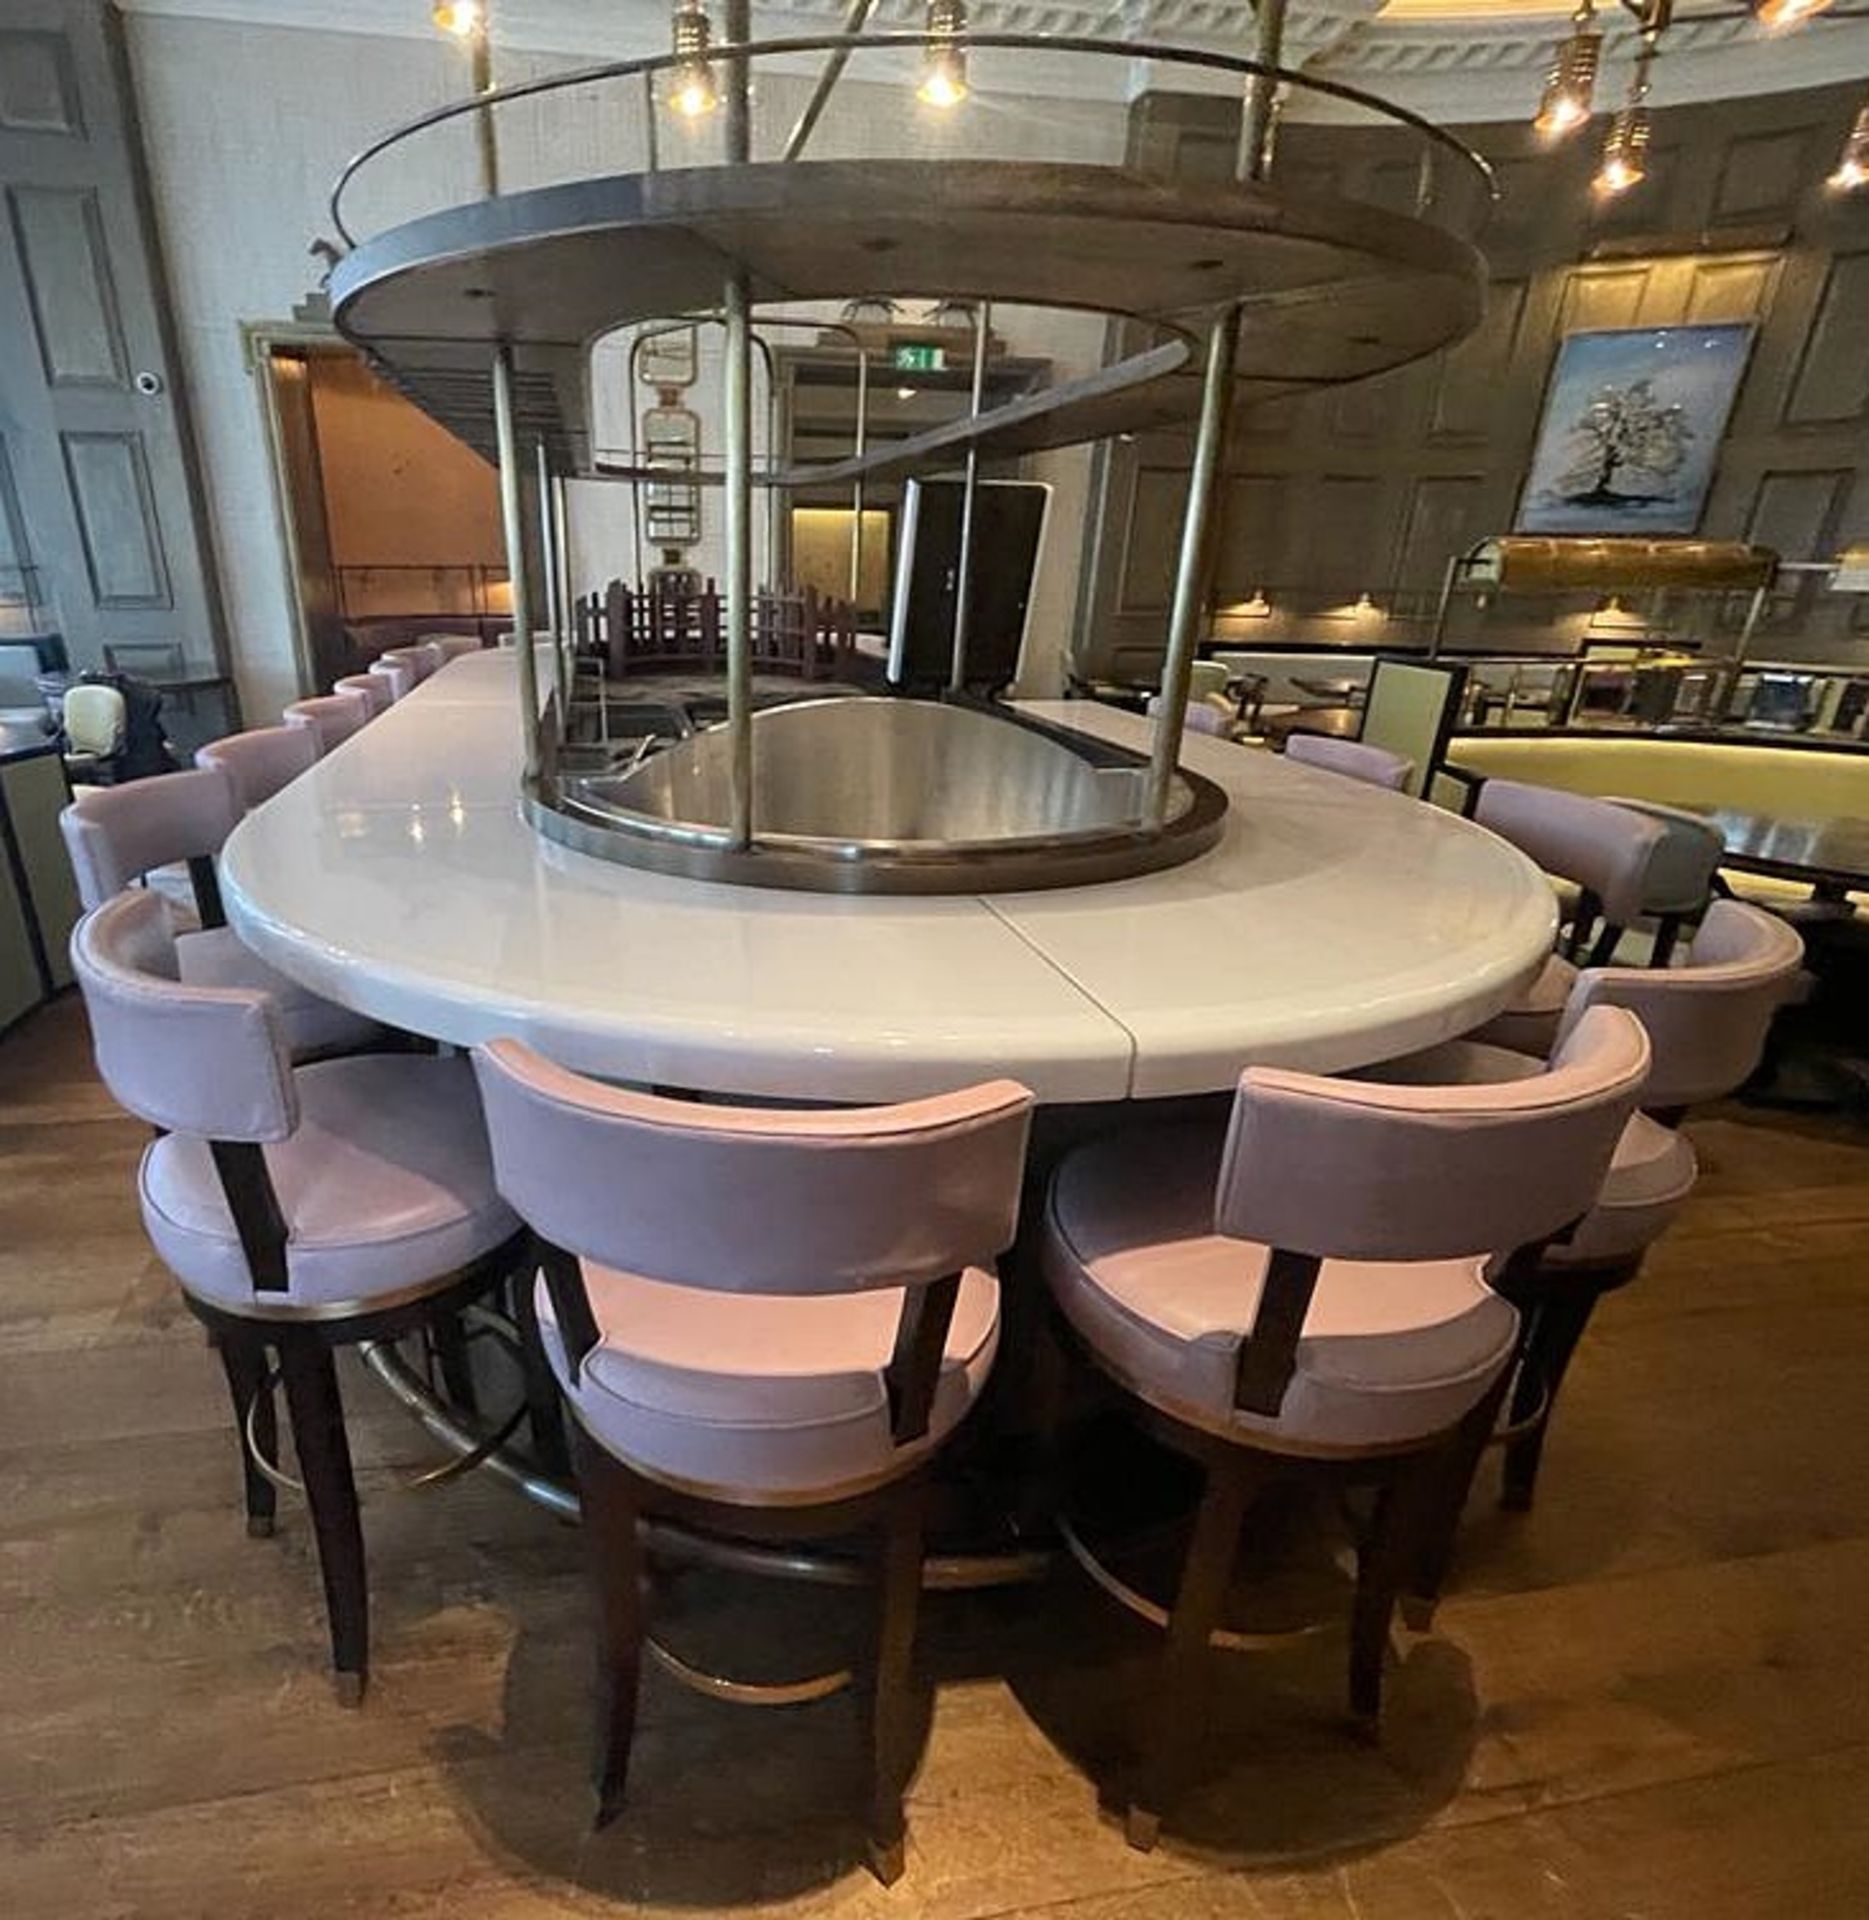 1 x Luxury Curved Restaurant 5.5-Metre Centrepiece Bar, Clad in Timber & Leather with 18 x Stools - Image 32 of 72